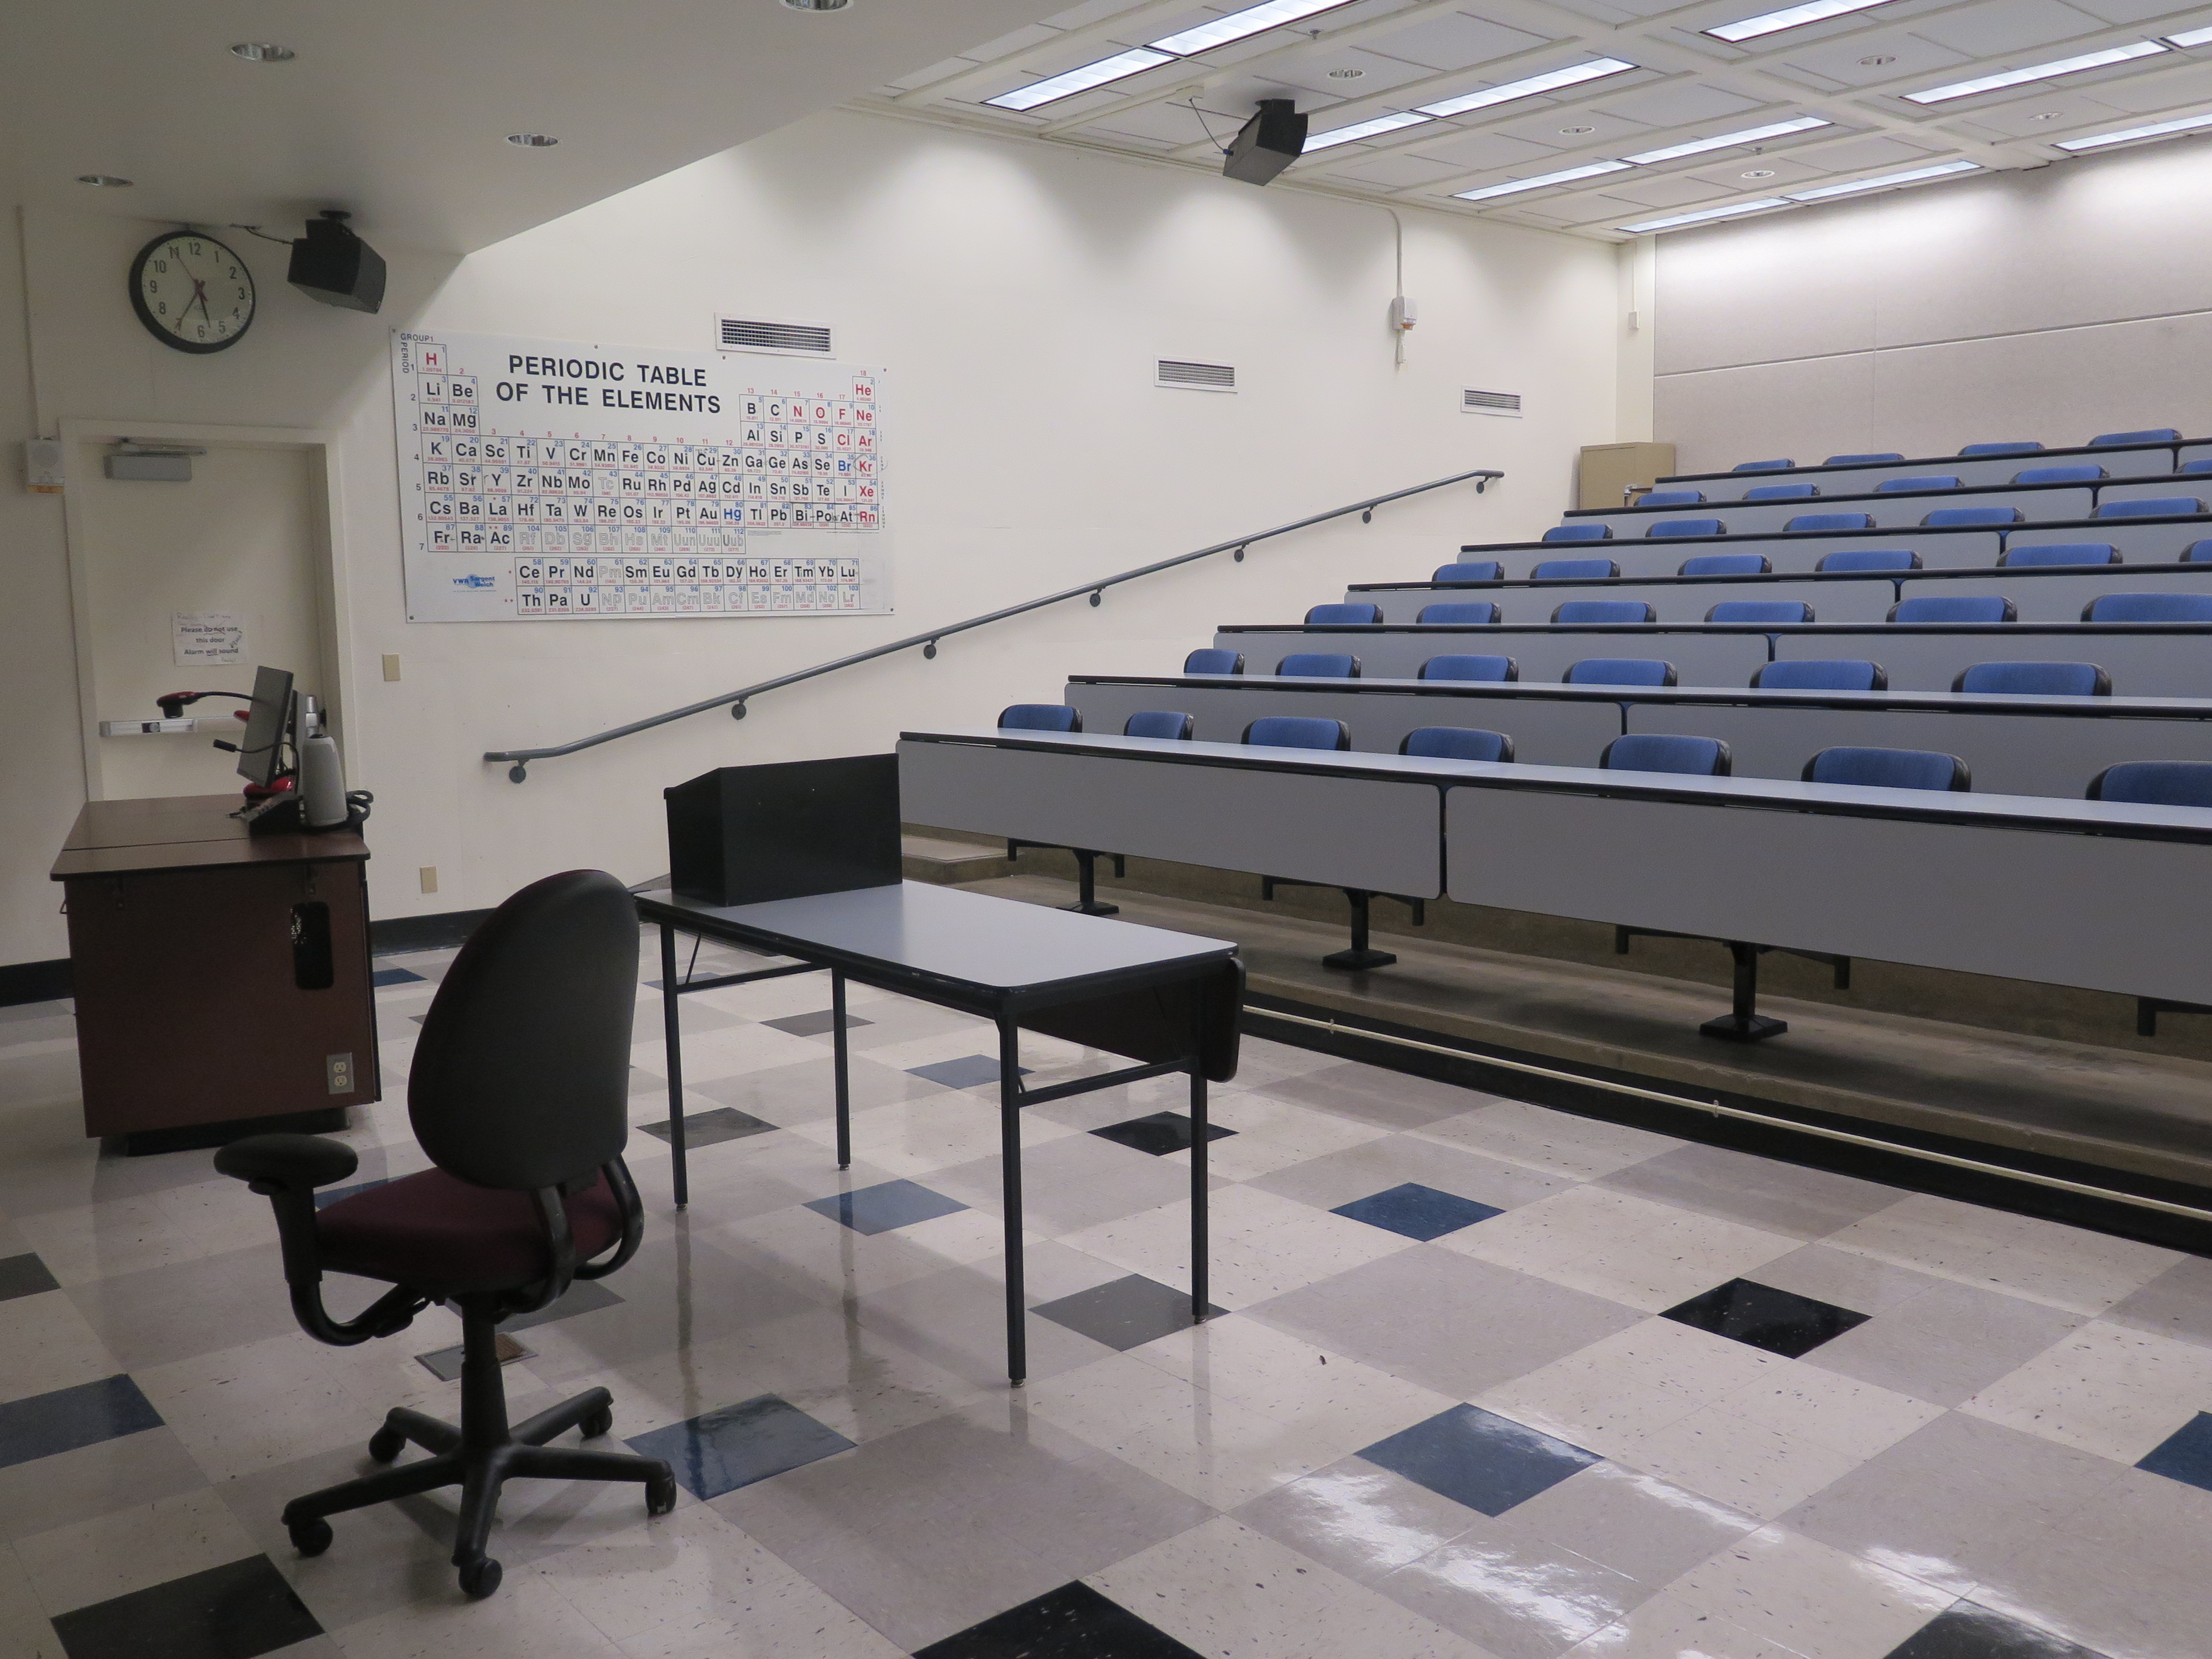 Room Consists of hard floors, Stationary rows of tables and chairs, a white board and podium are both located at the front of the room. This room also uses a Rear Screen projector, it is the large Gray surface next to the white board